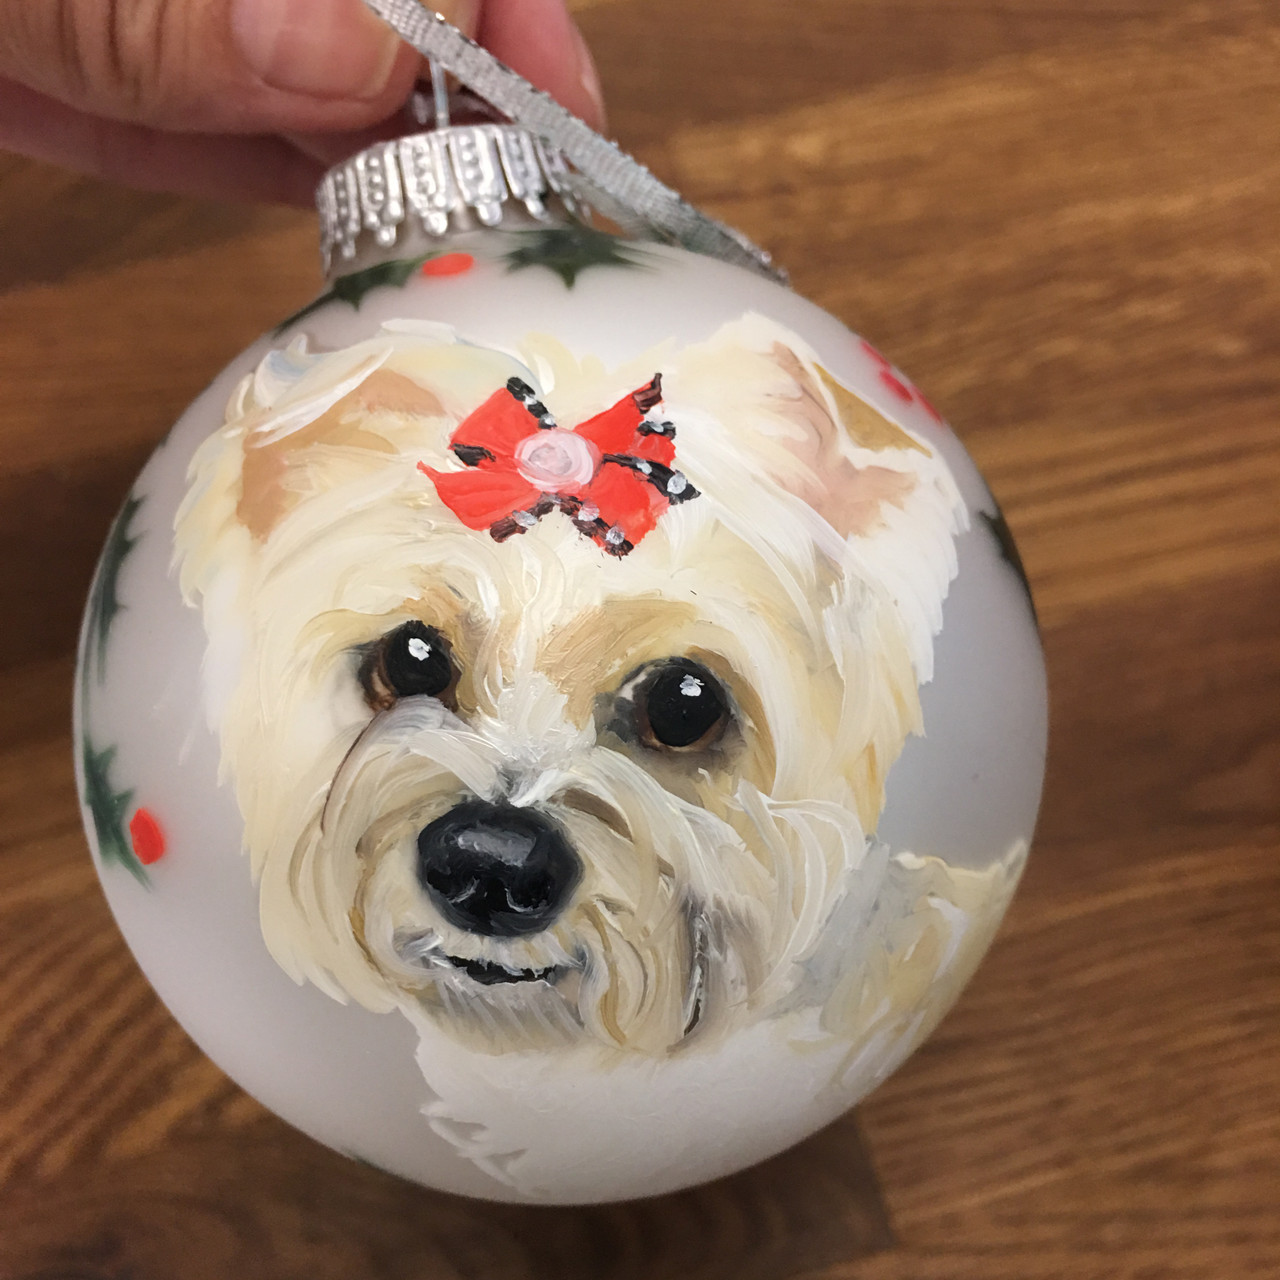 Hand-painted Dog and Cat Holiday Ornament Balls at